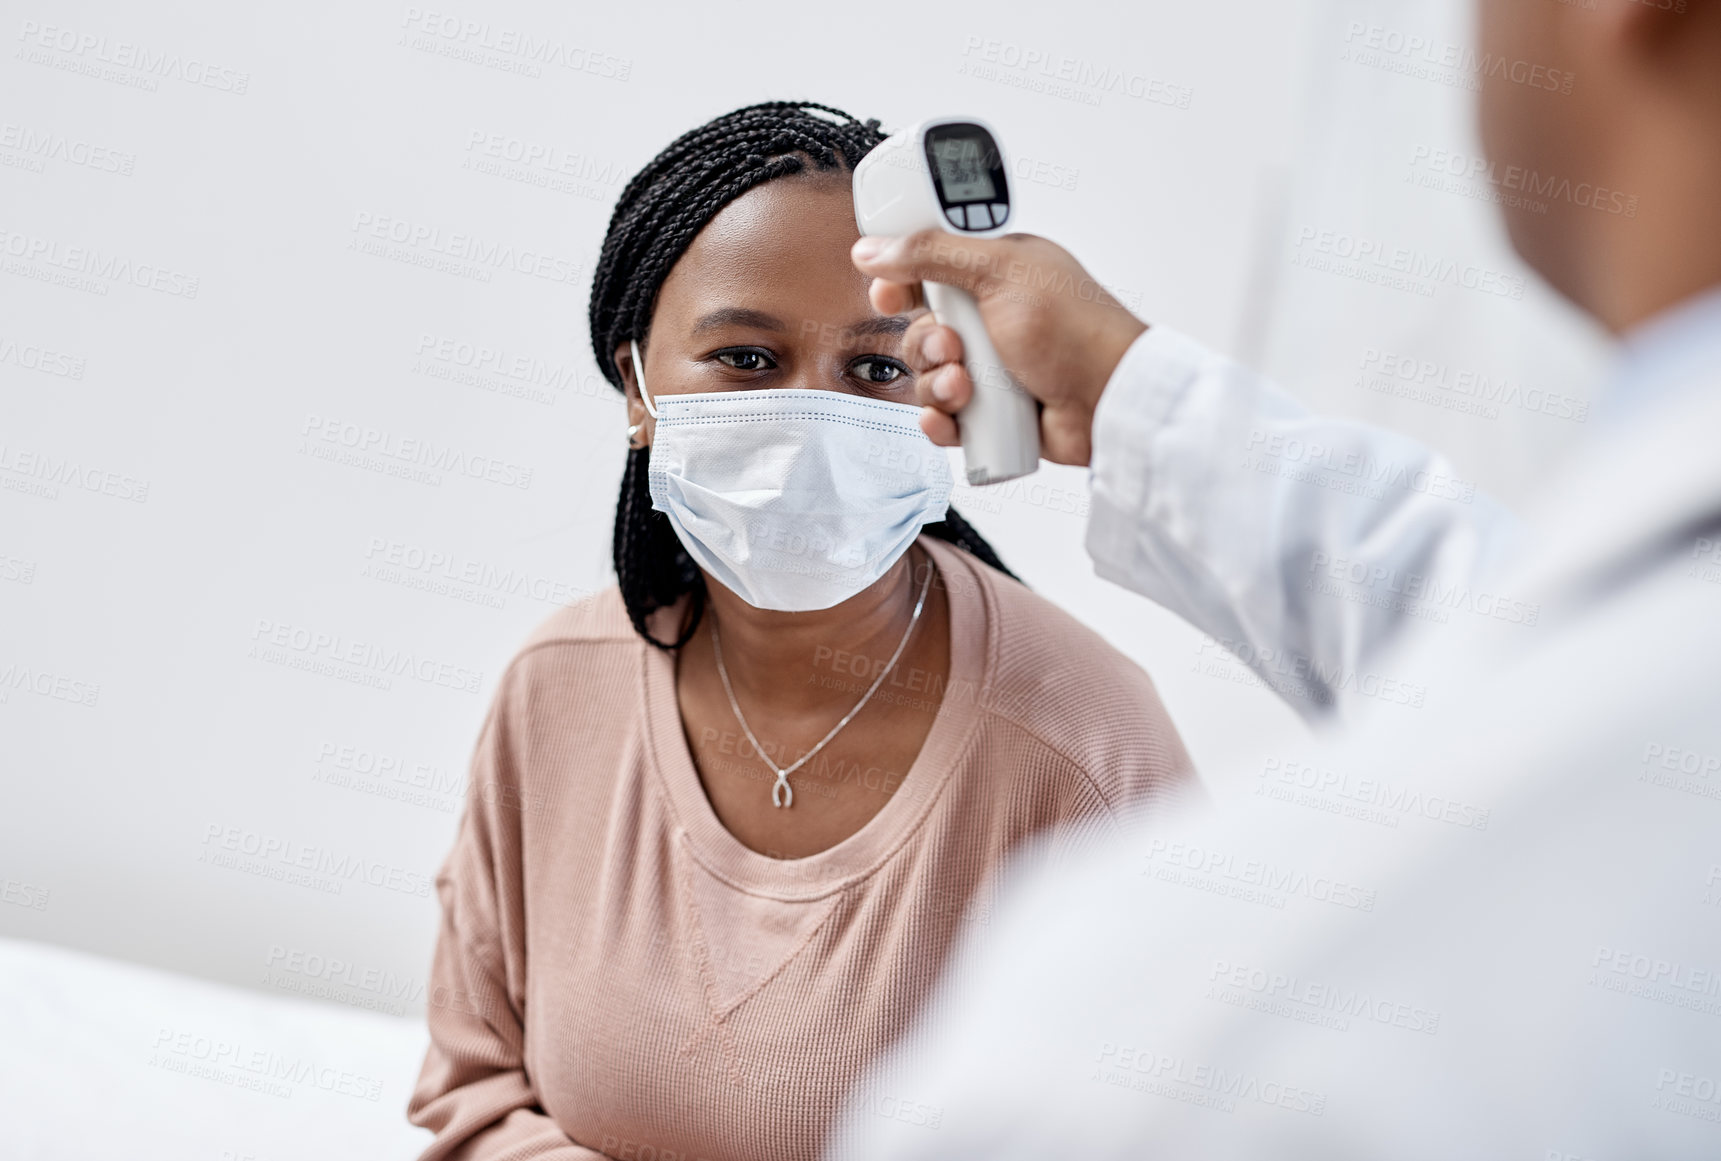 Buy stock photo Shot of a young woman getting her temperature taken with an infrared thermometer by a doctor